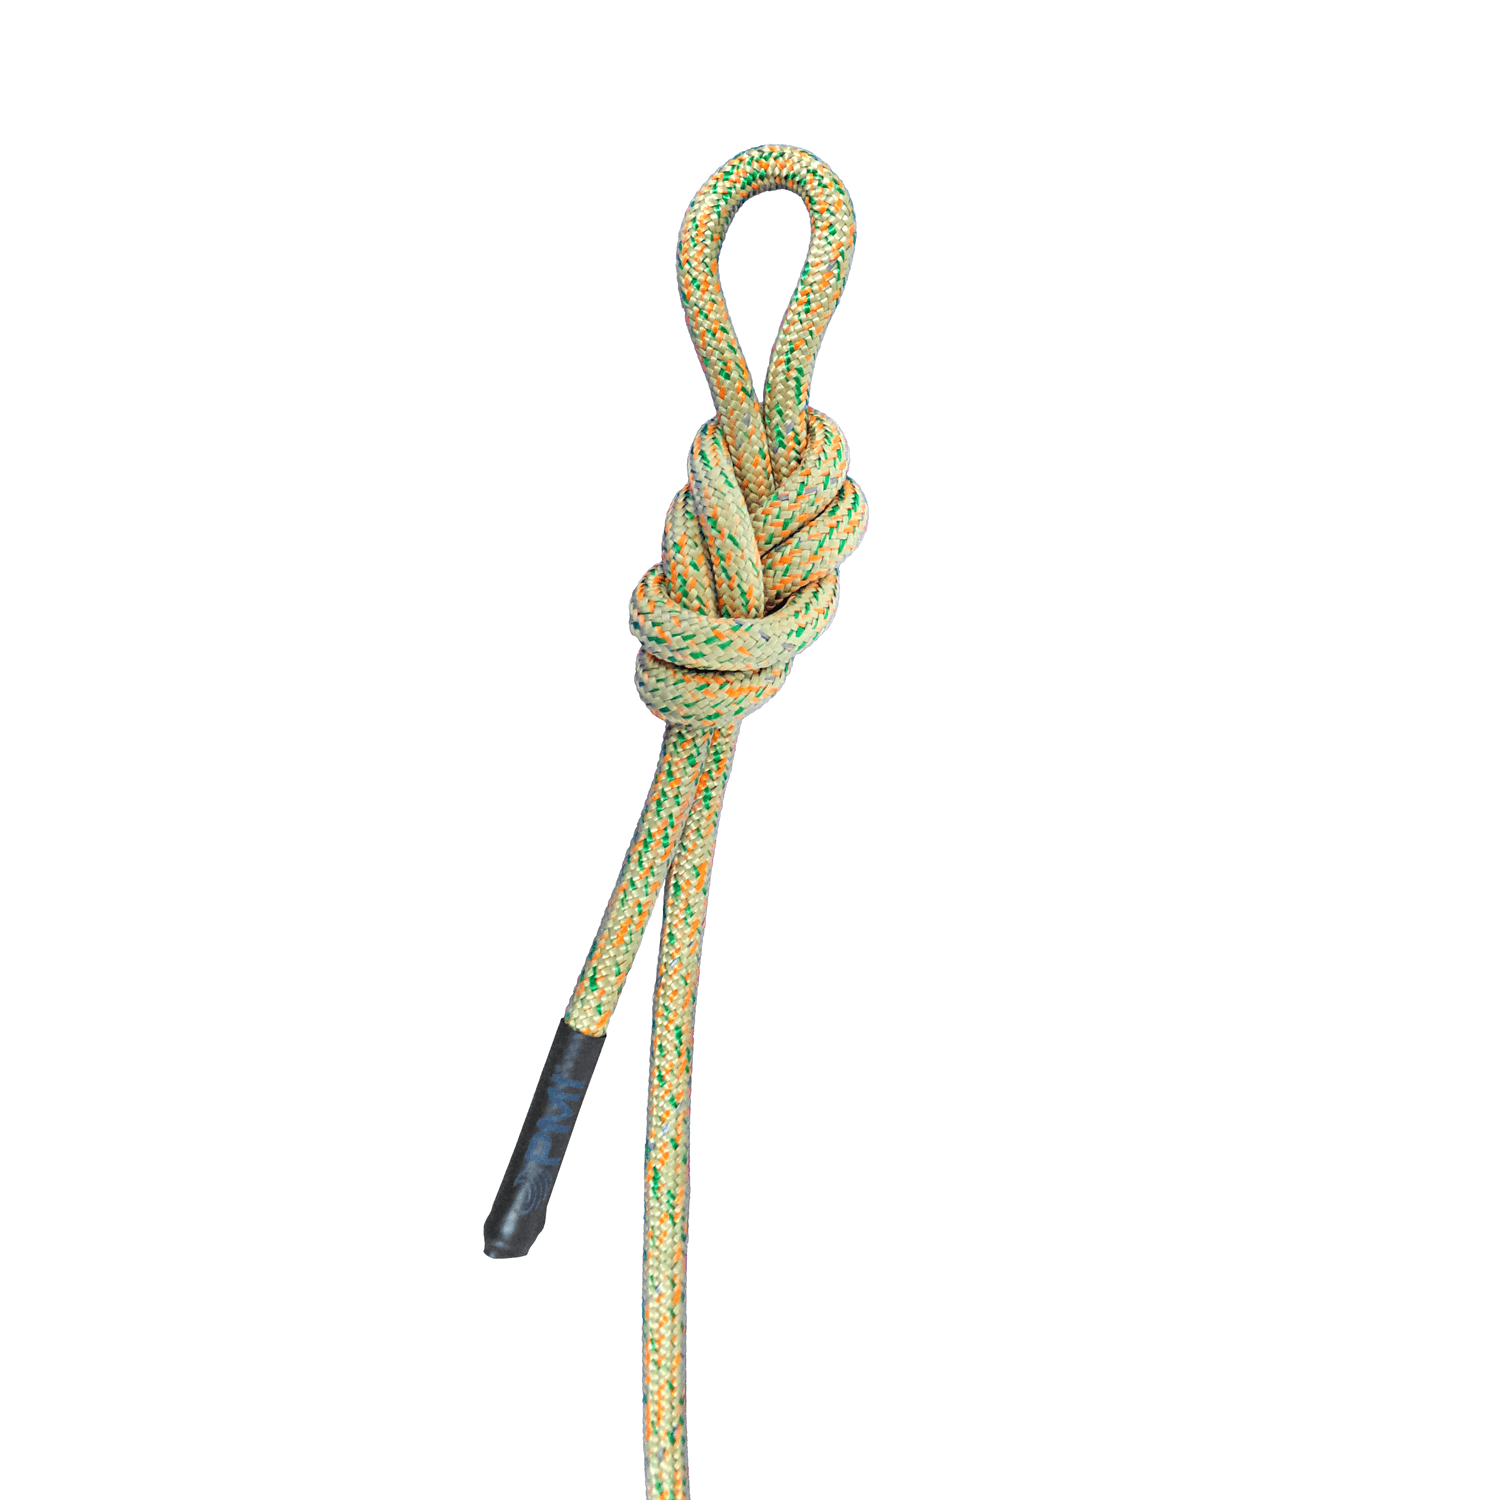 https://pmirope.com/wp-content/uploads/2021/09/8mm-rope-dura-shield-retro-reflective.png